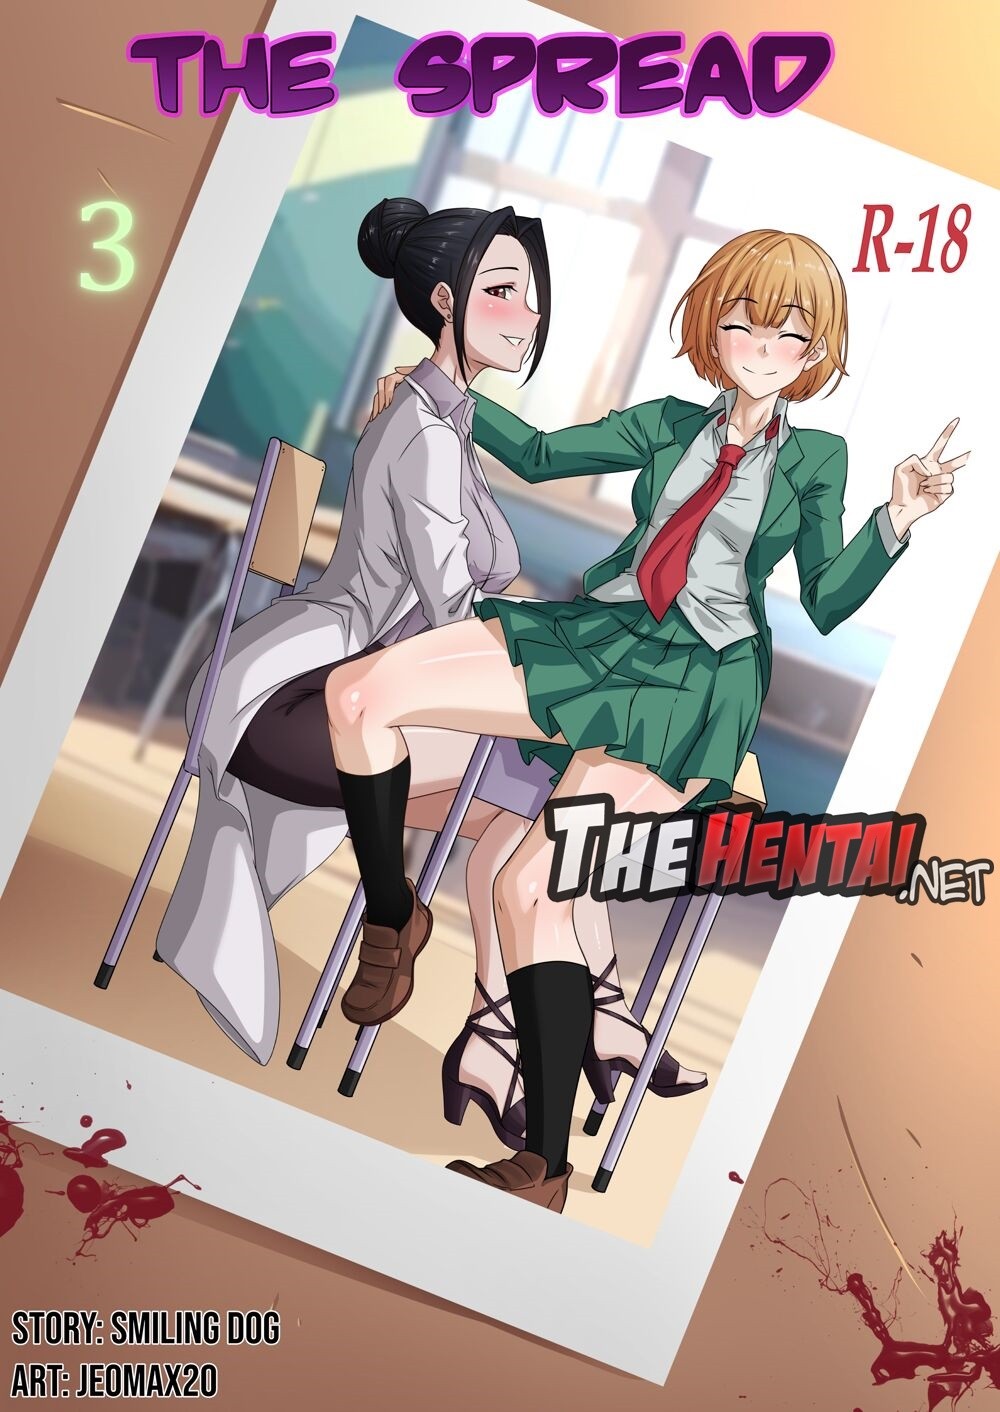 The Spread Part 3 Hentai pt-br 01